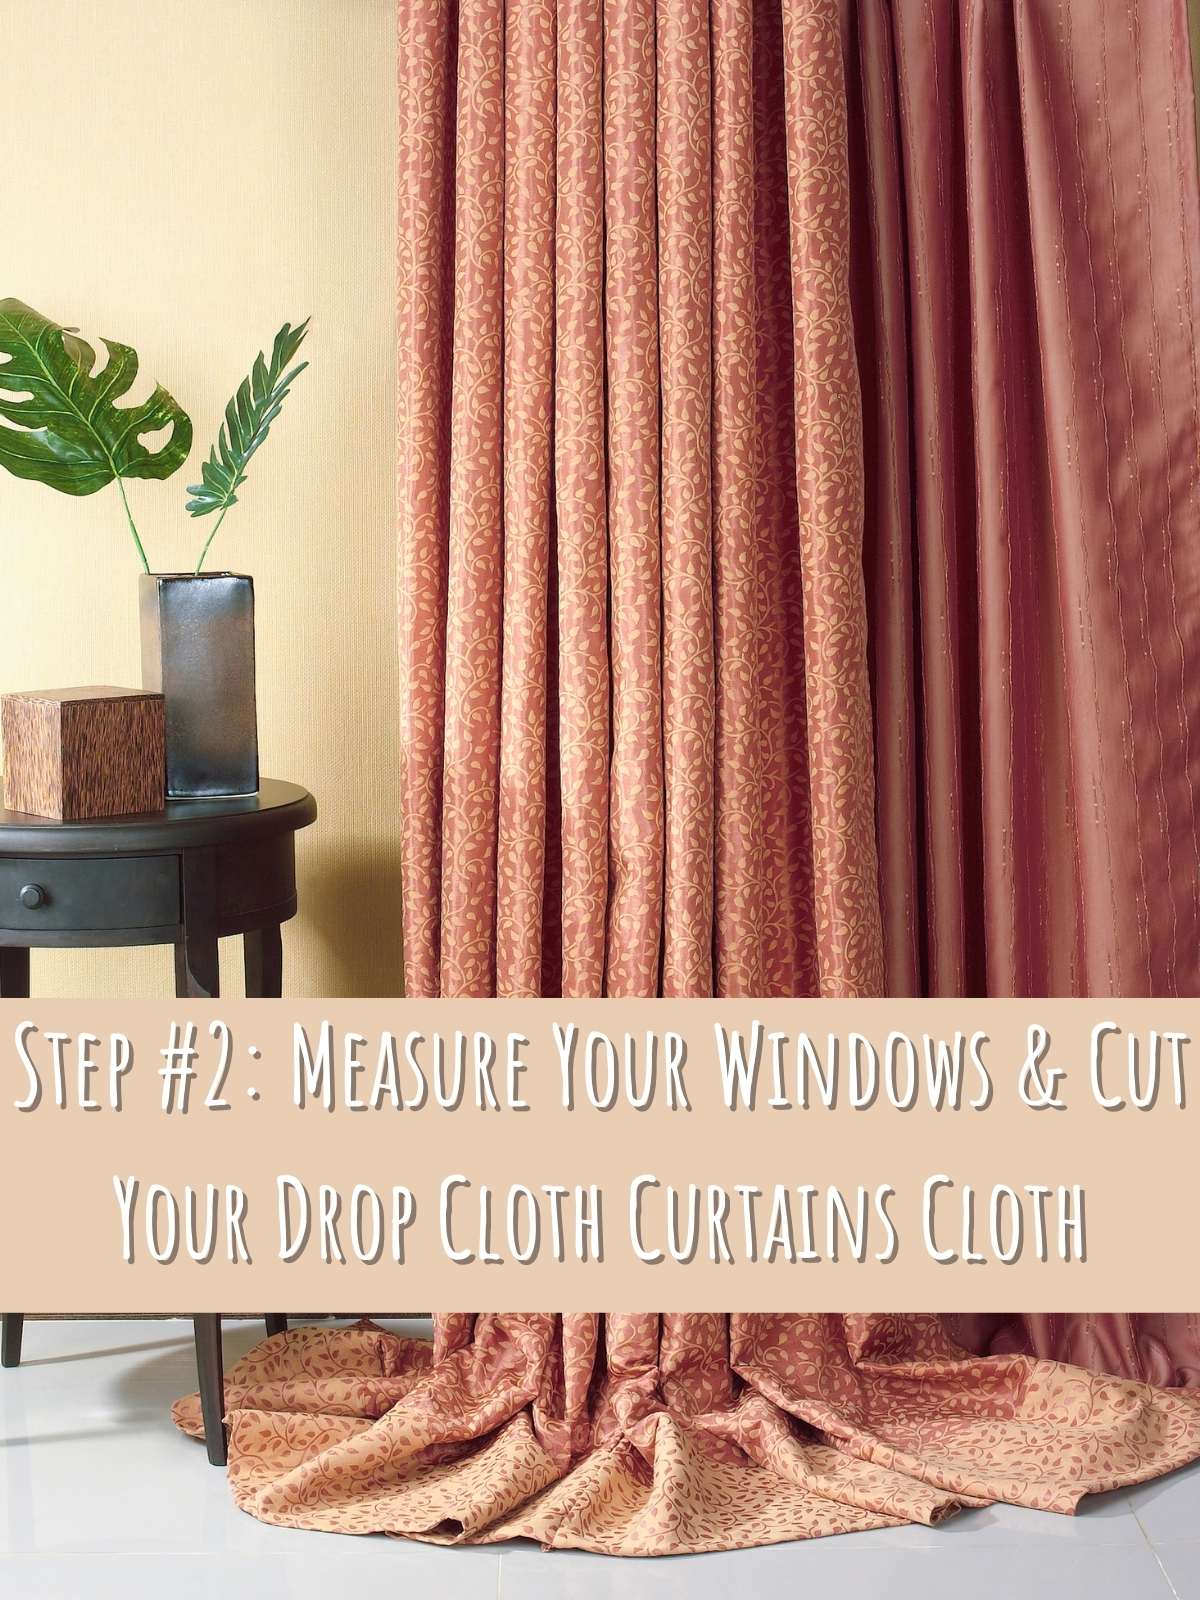 Step 2, Measure your windows cut your drop cloth curtains cloth. Photo of long curtains that need to be cut. 